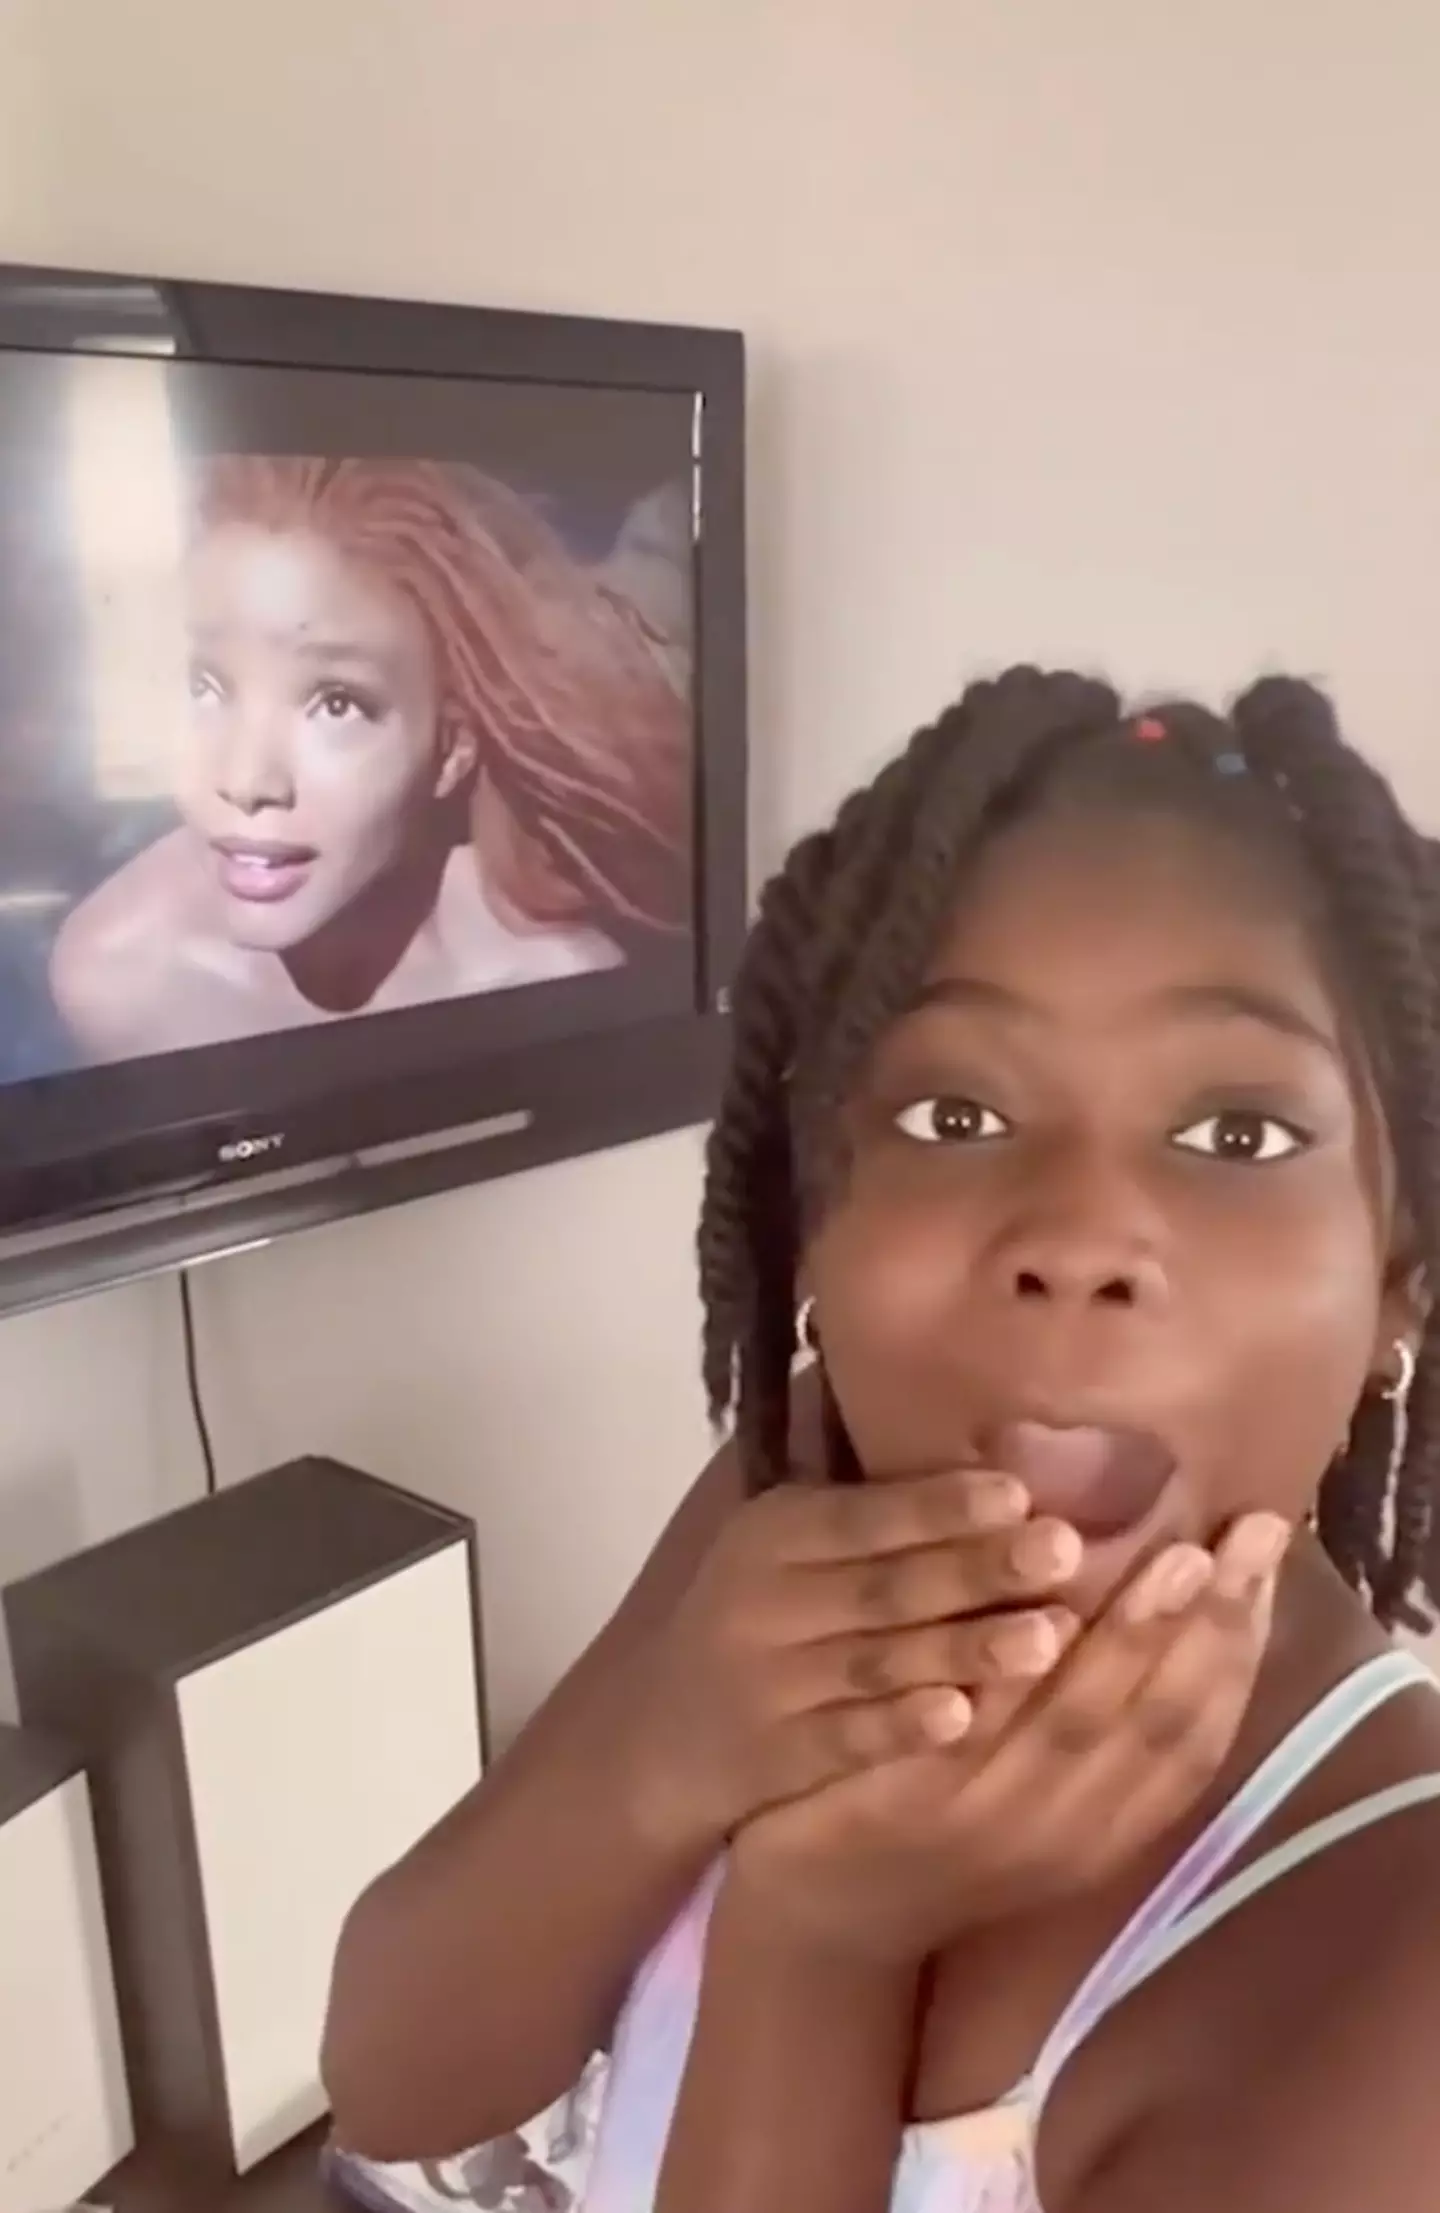 Parents have been sharing their daughters reactions to the new Little Mermaid trailer.